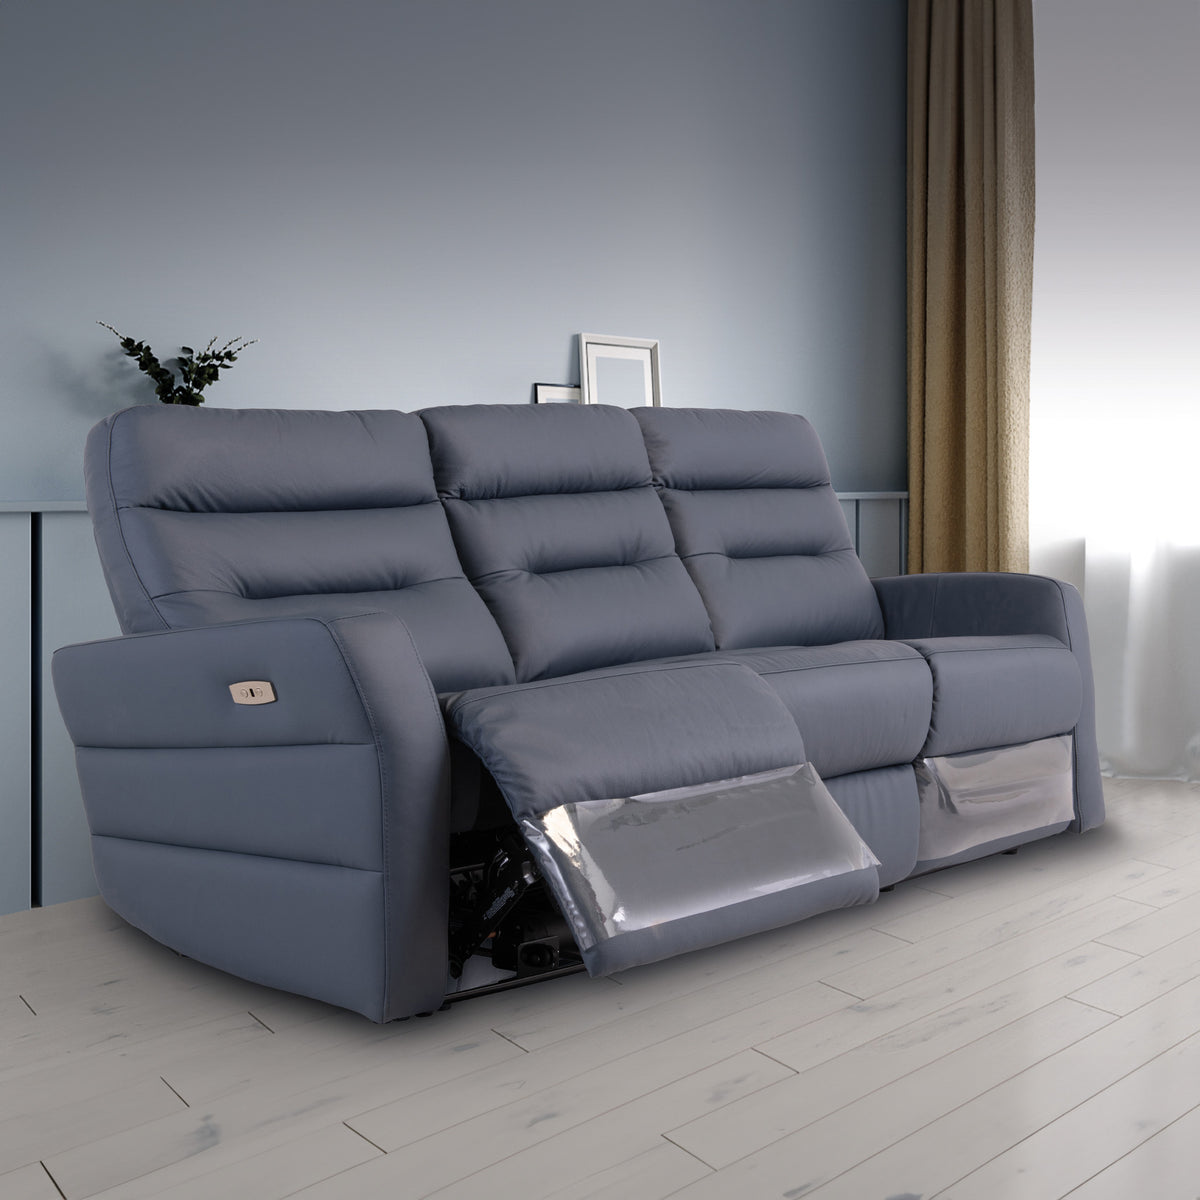 Harlem Blue Leather Electric Reclining 3 Seater Sofa for living room